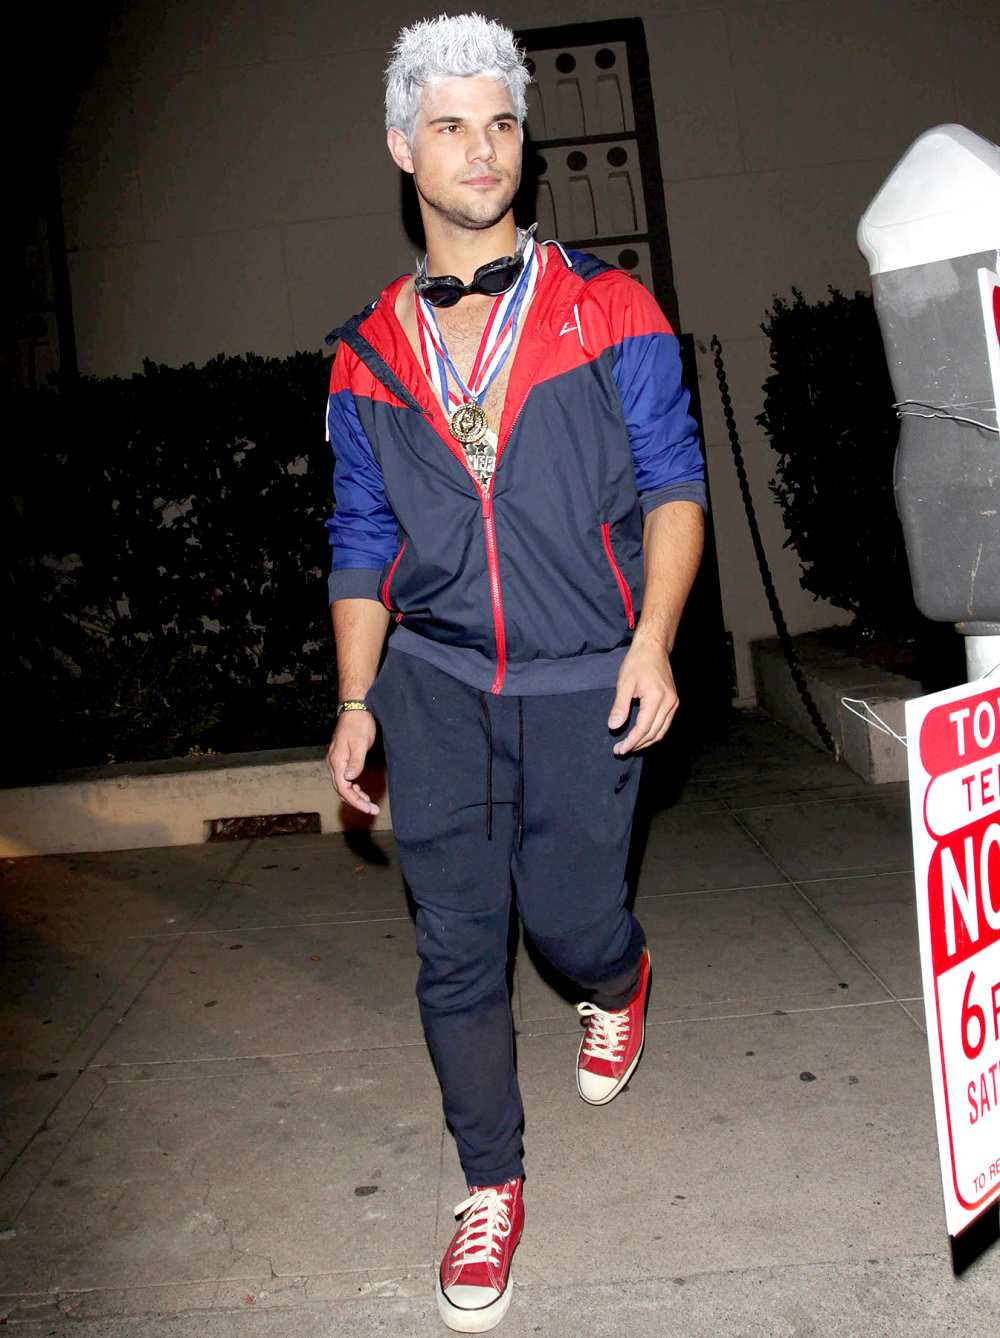 Taylor Lautner is seen on Oct. 30, 2016, at a Halloween party in Los Angeles.